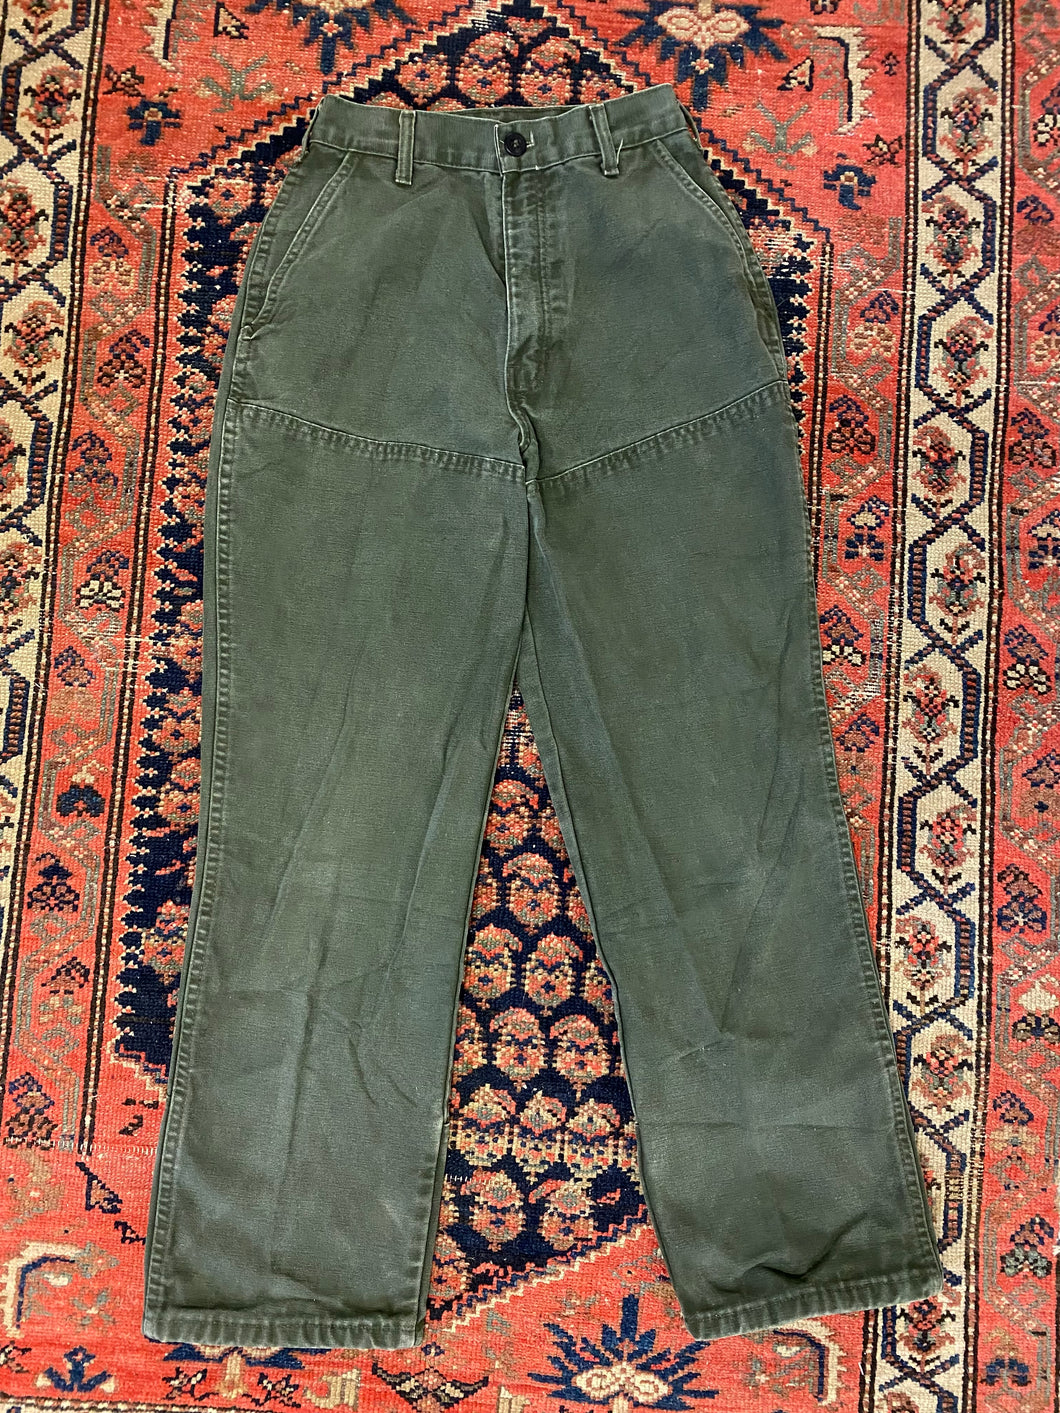 Vintage High Waisted Work Pants - 26inches